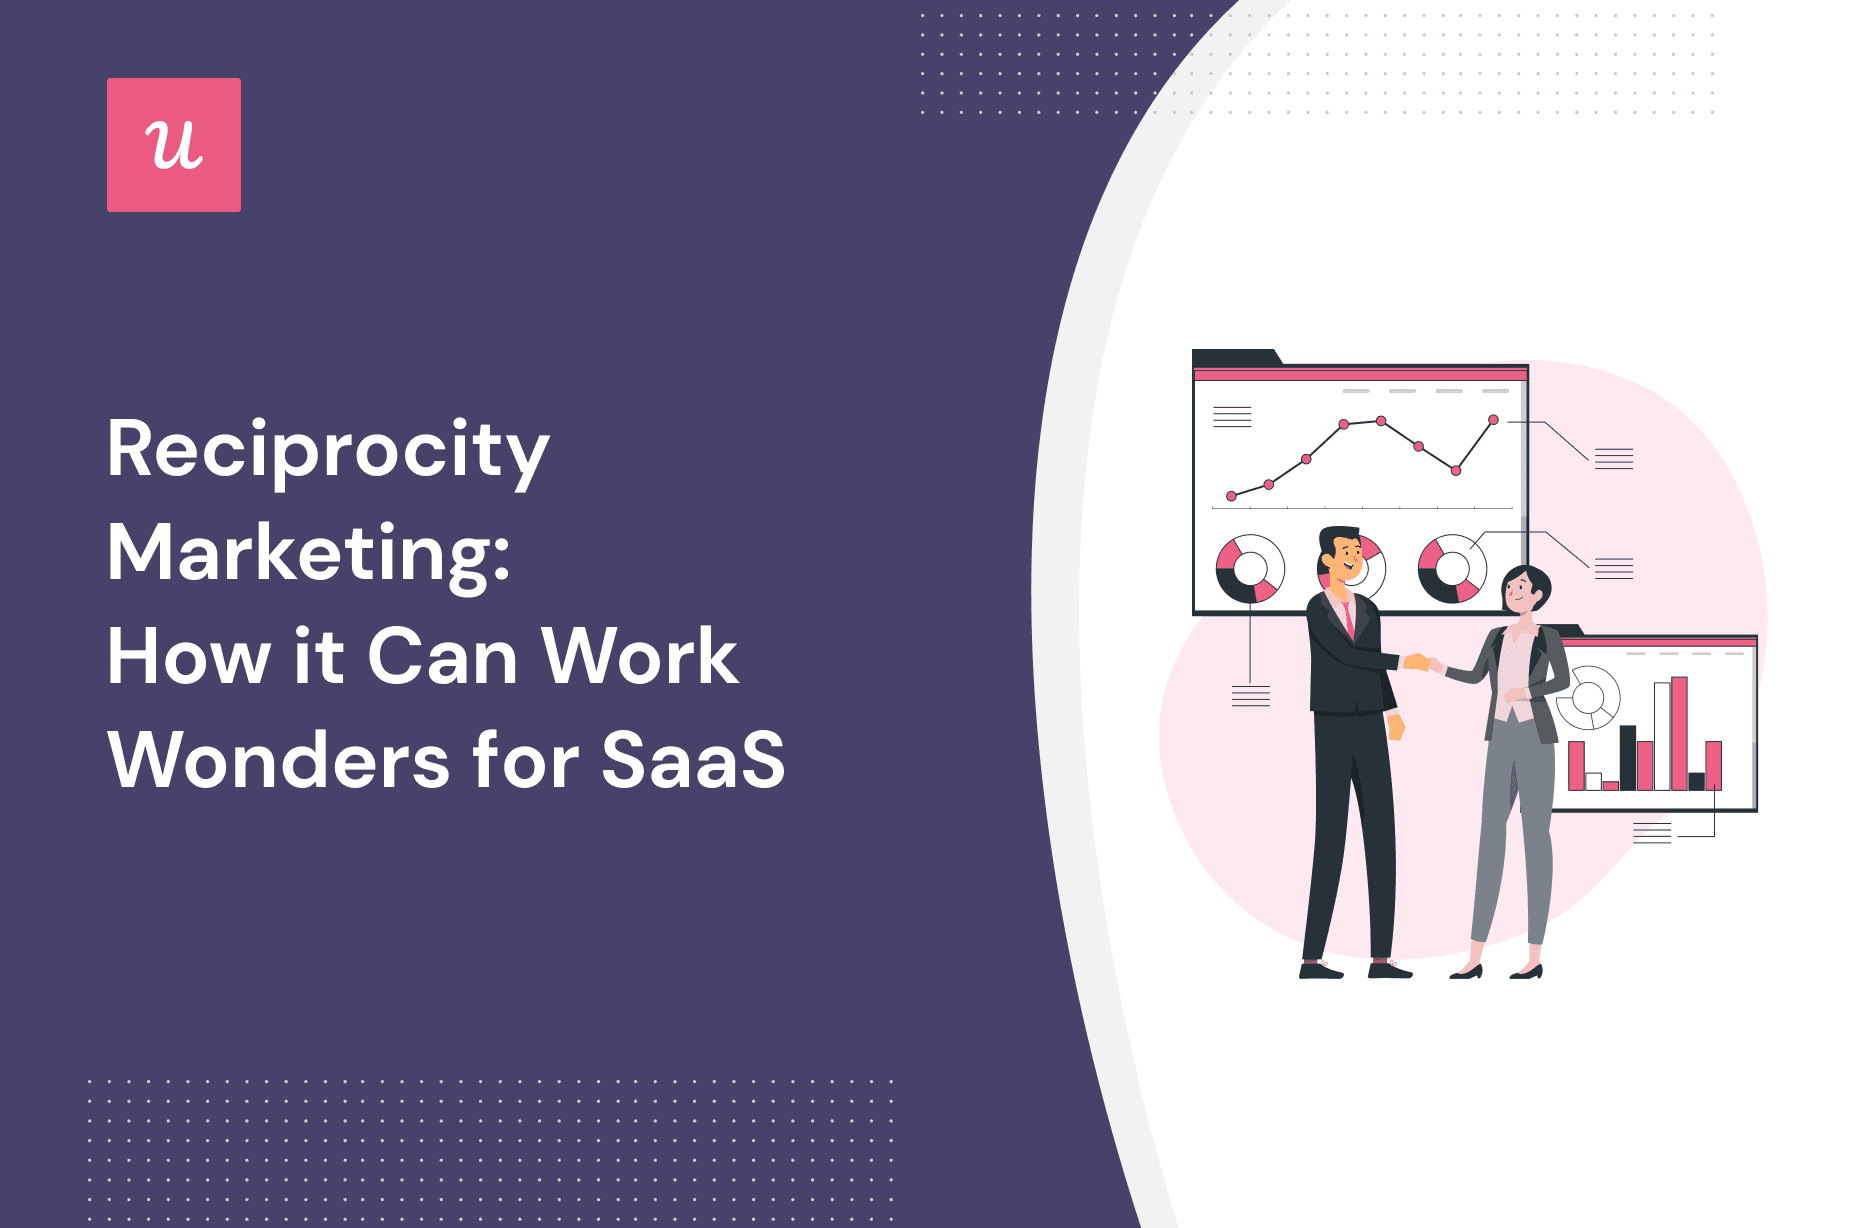 Reciprocity Marketing: How It Can Work Wonders for SaaS cover